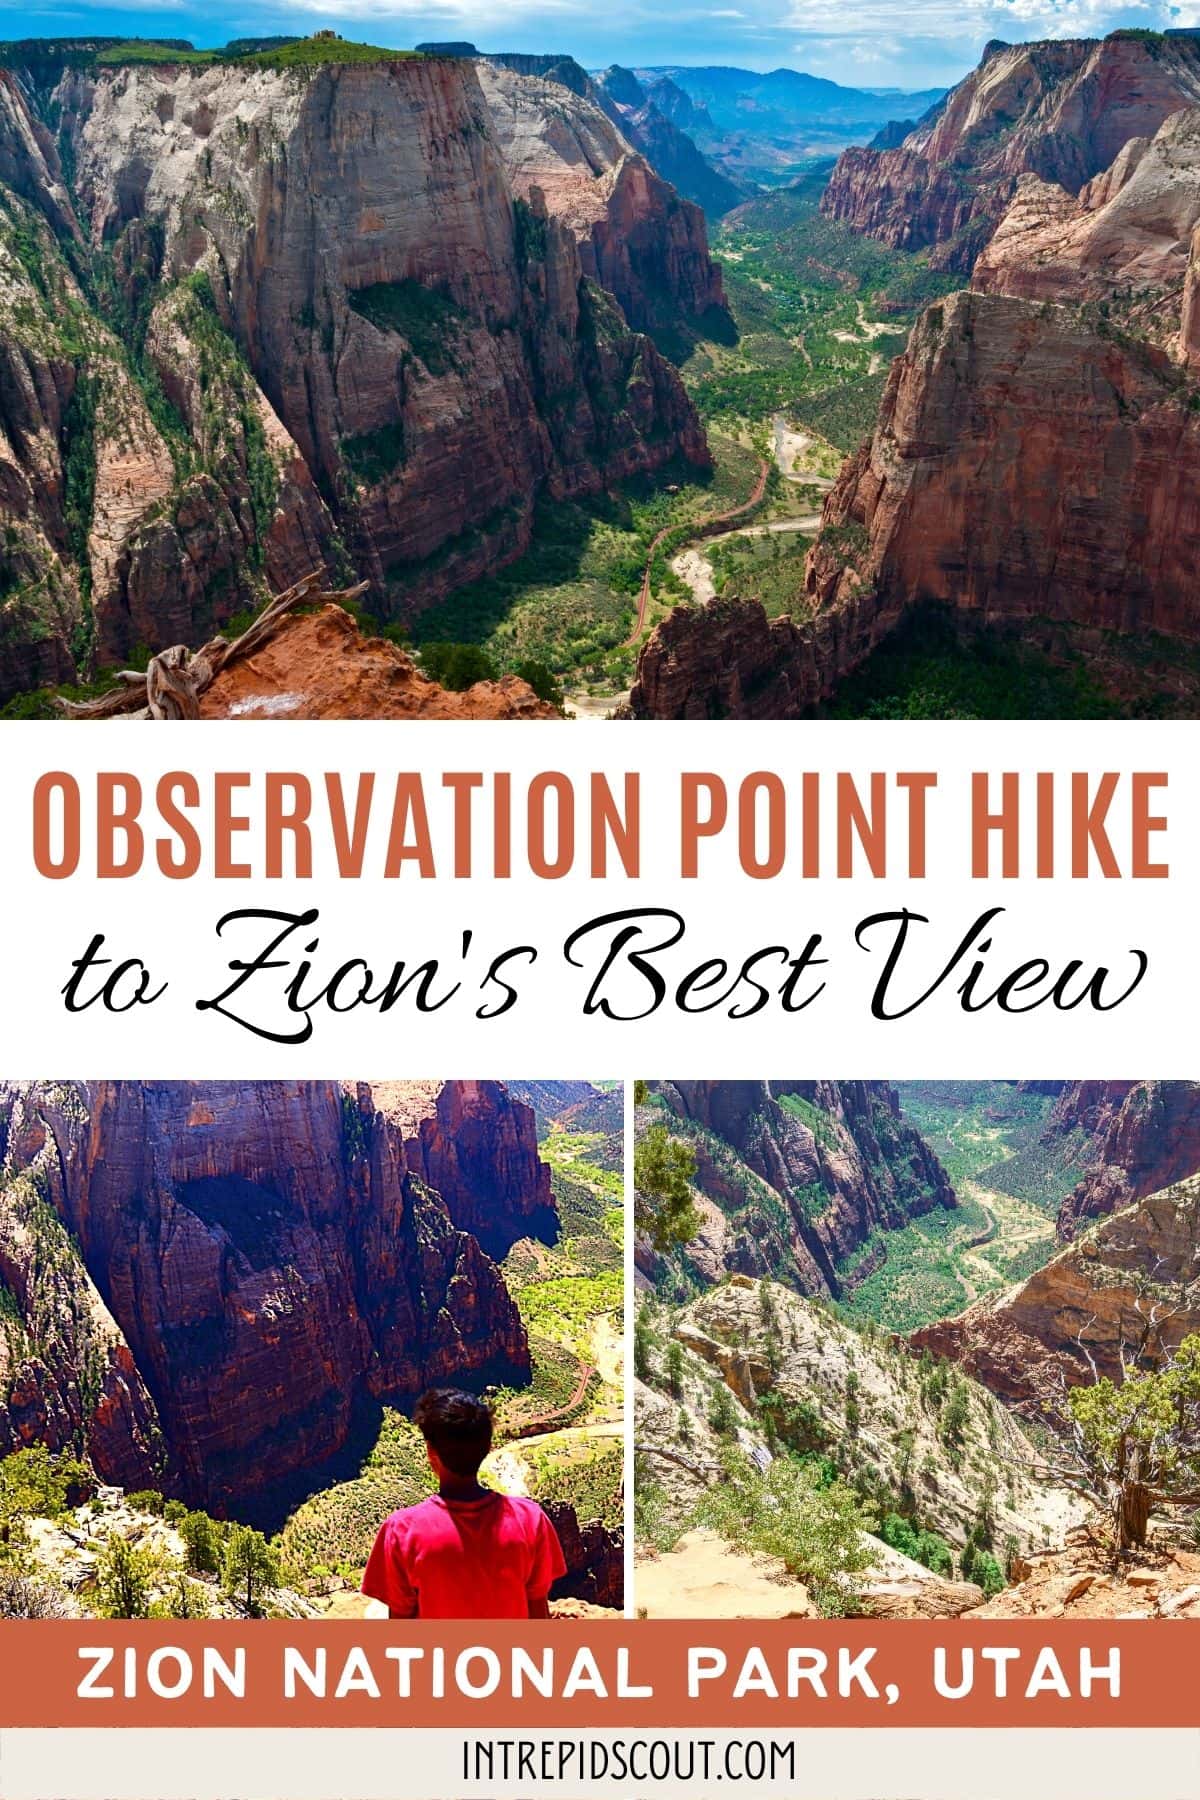 Observation Point Hike to Zion's Best View